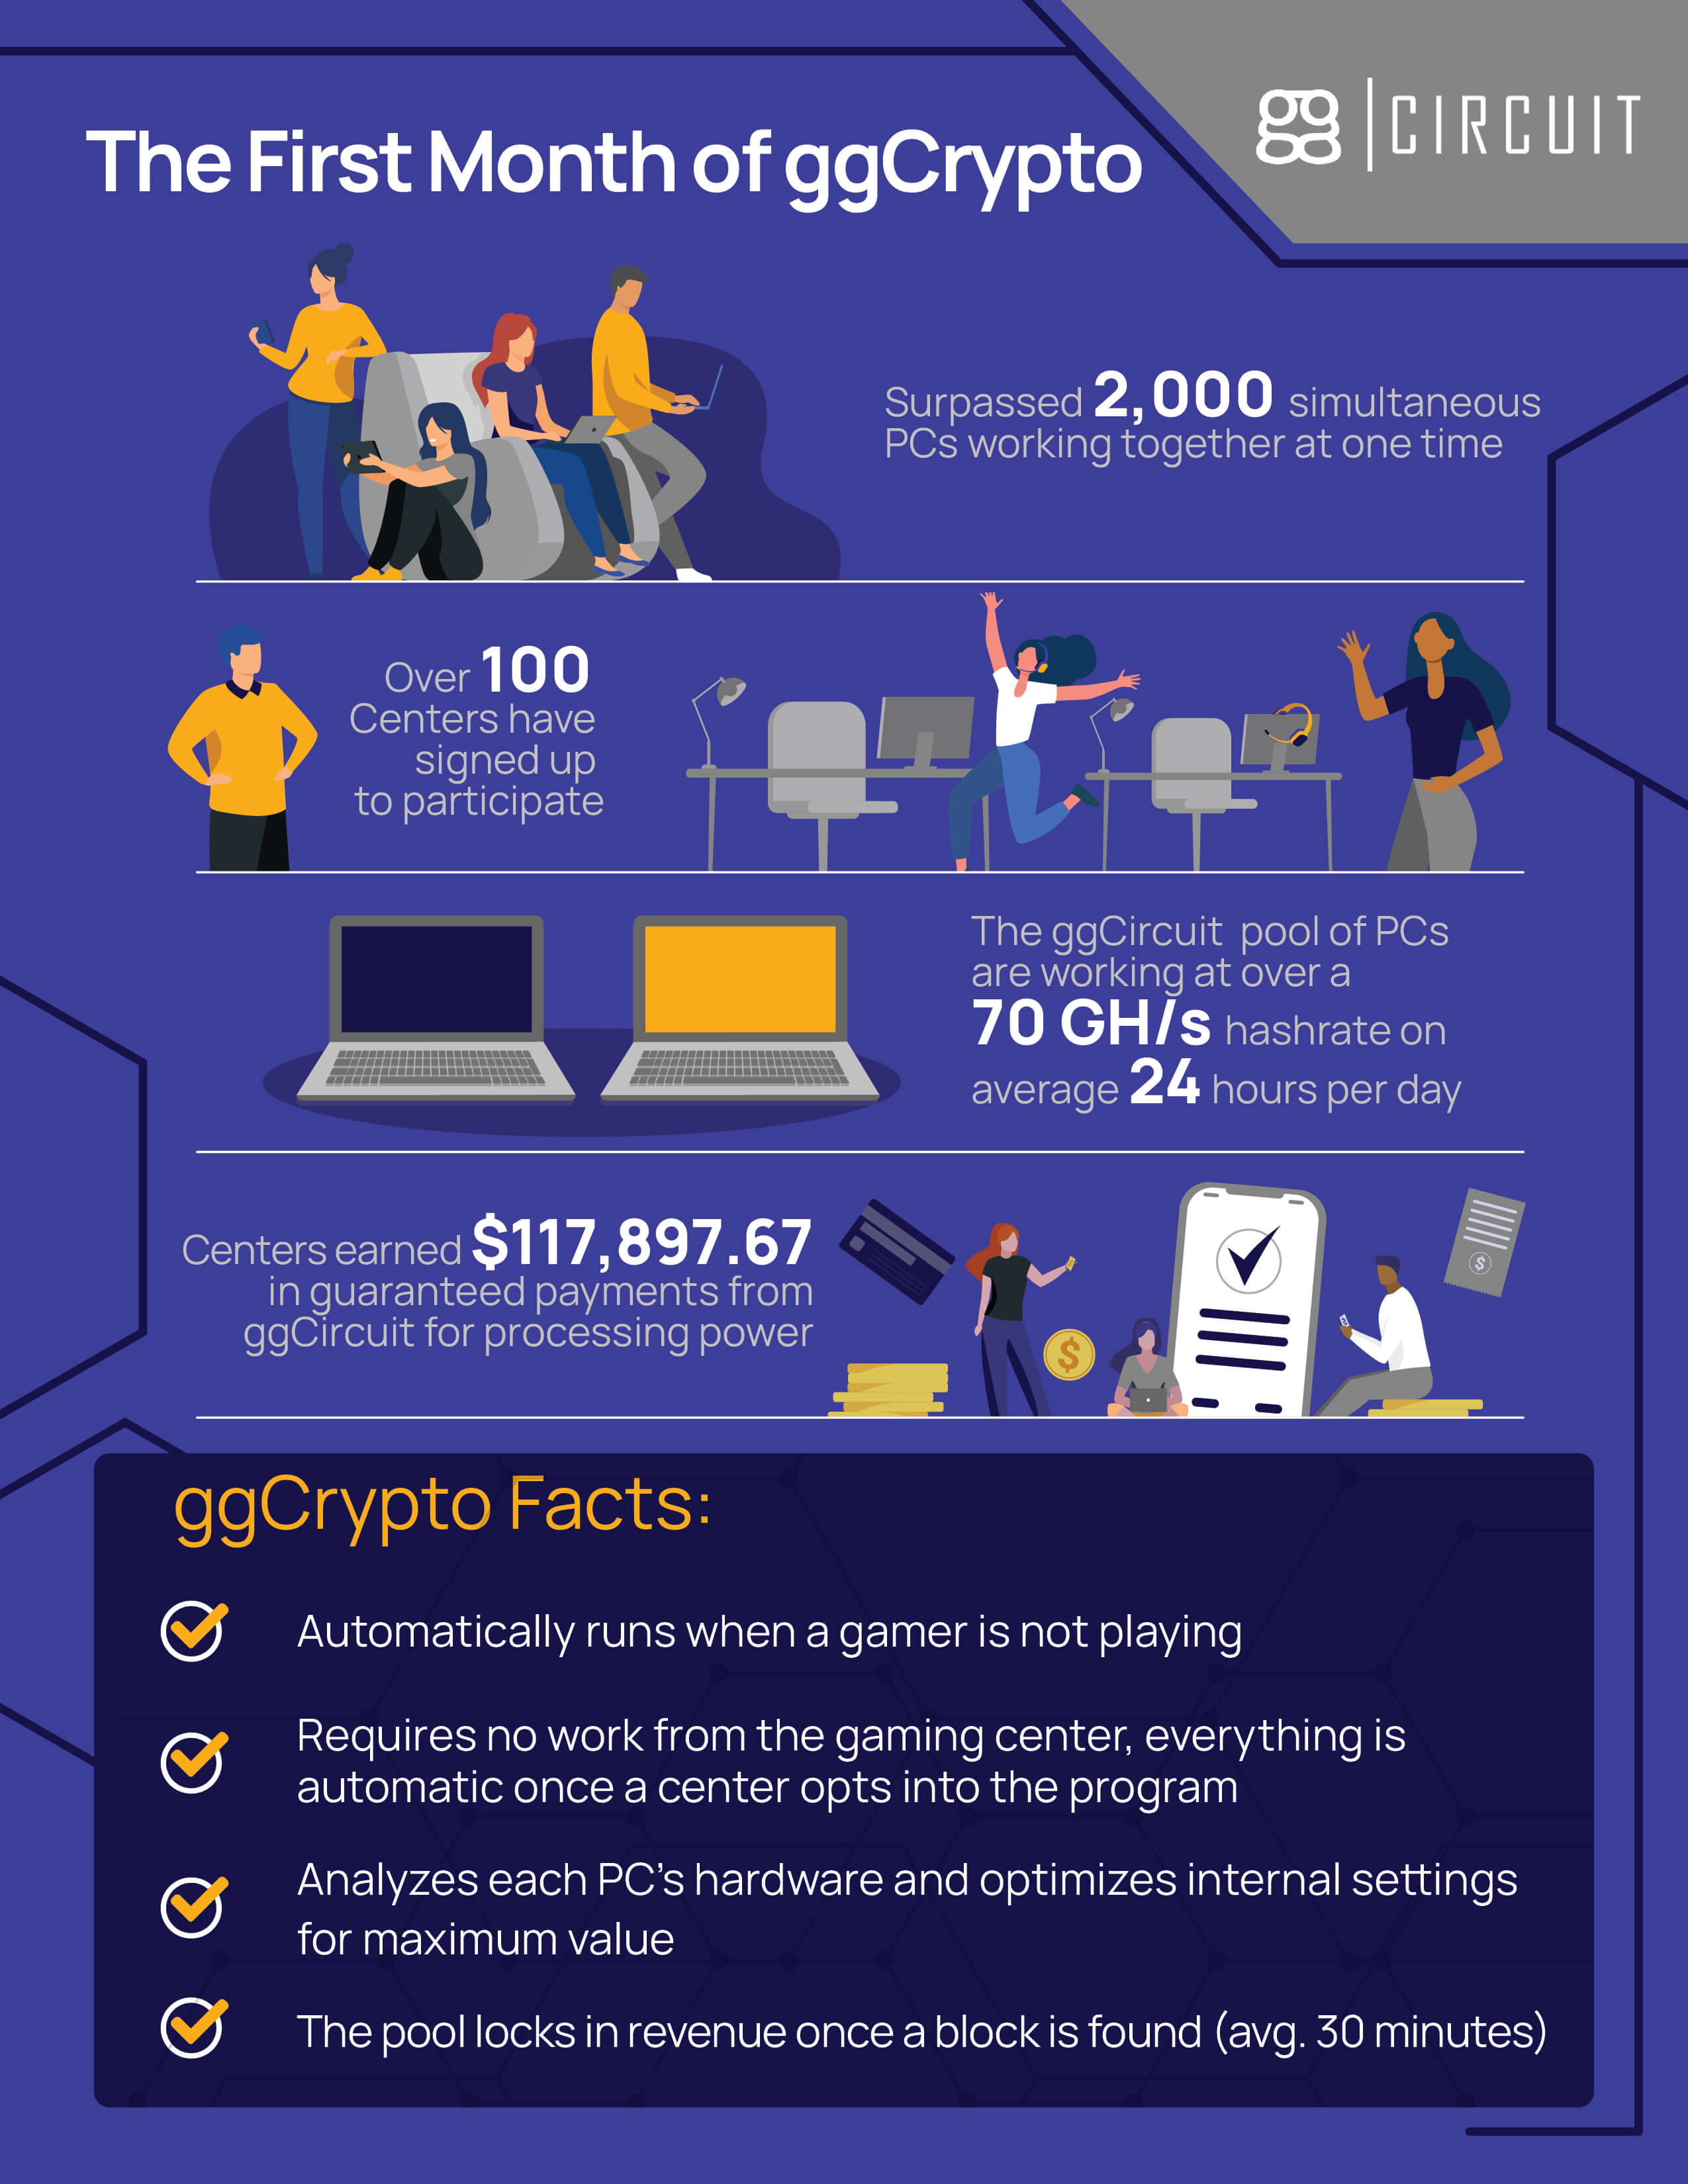 The first month of ggCrypto - esports centers earned $117,897.67 in guaranteed payments